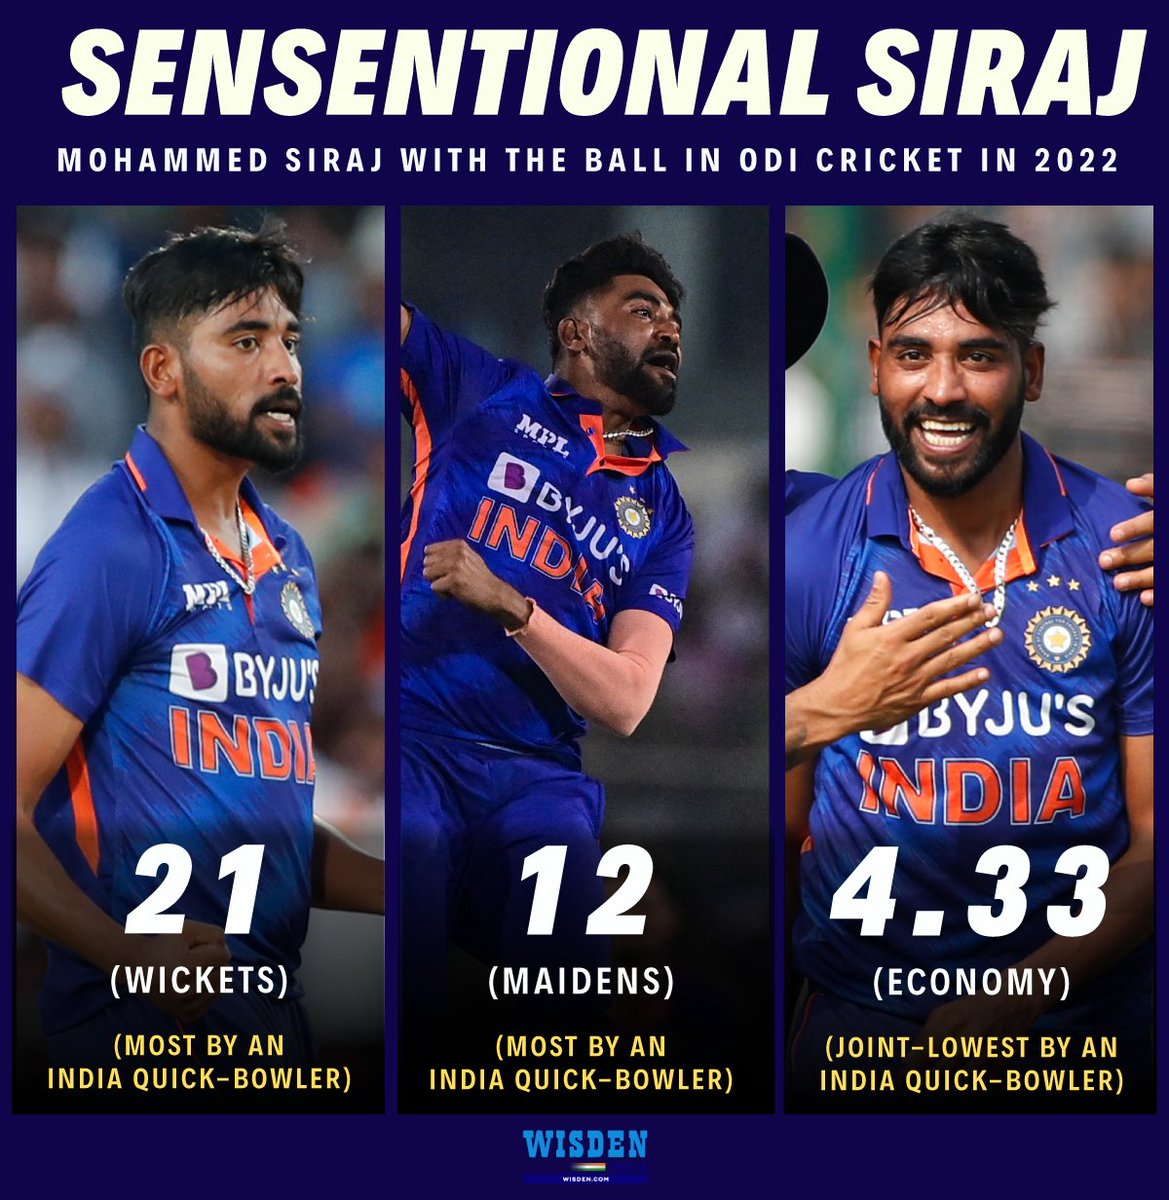 Innings - 13
Wickets - 21
Average - 22.09
Economy - 4.33

A memorable year in ODI cricket for Mohammed Siraj 👏

#MoahmmedSiraj #India #BANvsIND #Cricket #ODIs